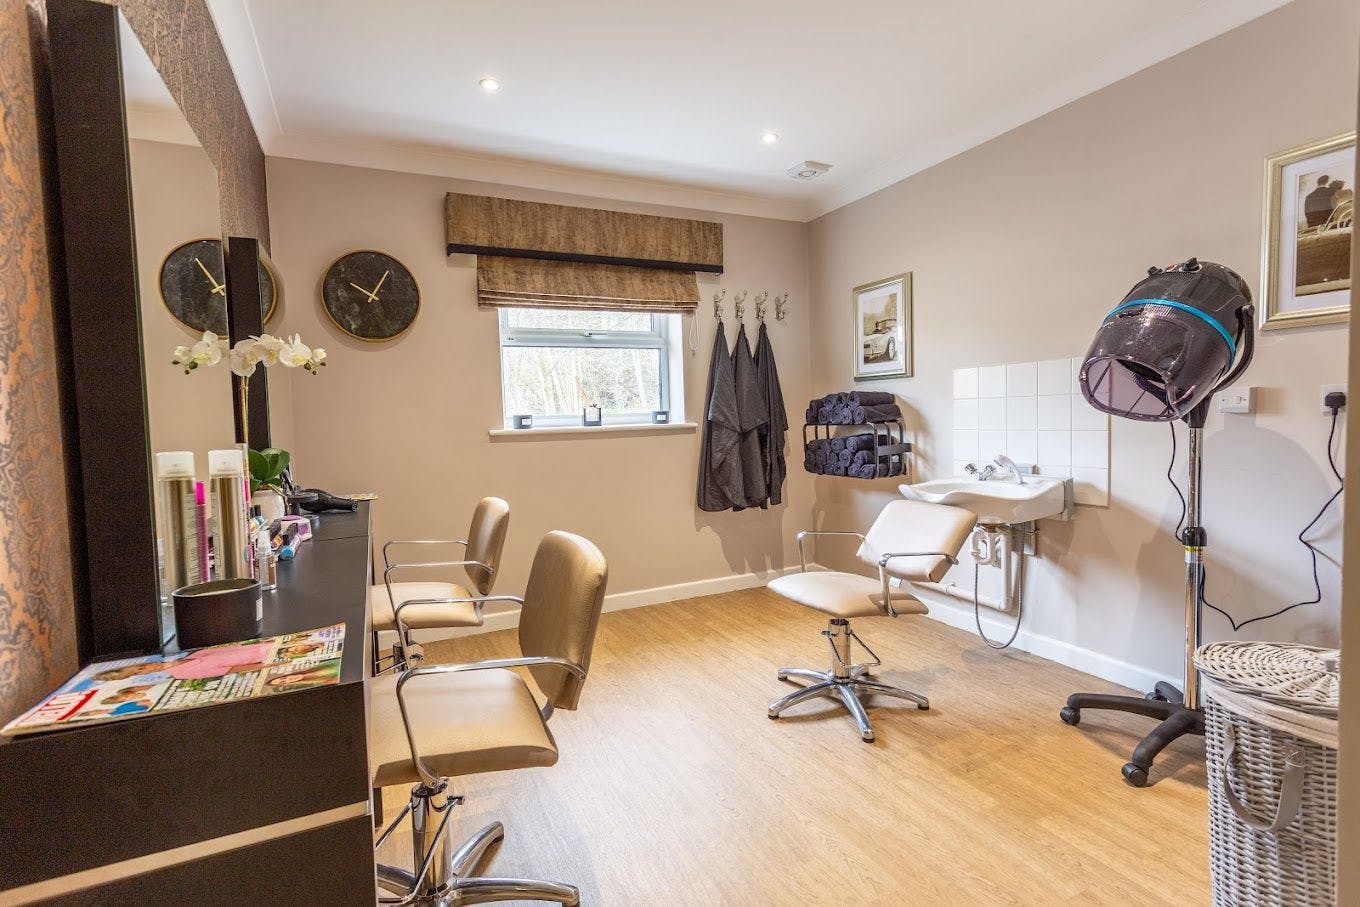 Salon at Monread Lodge Care Home in Hertfordshire, East of England